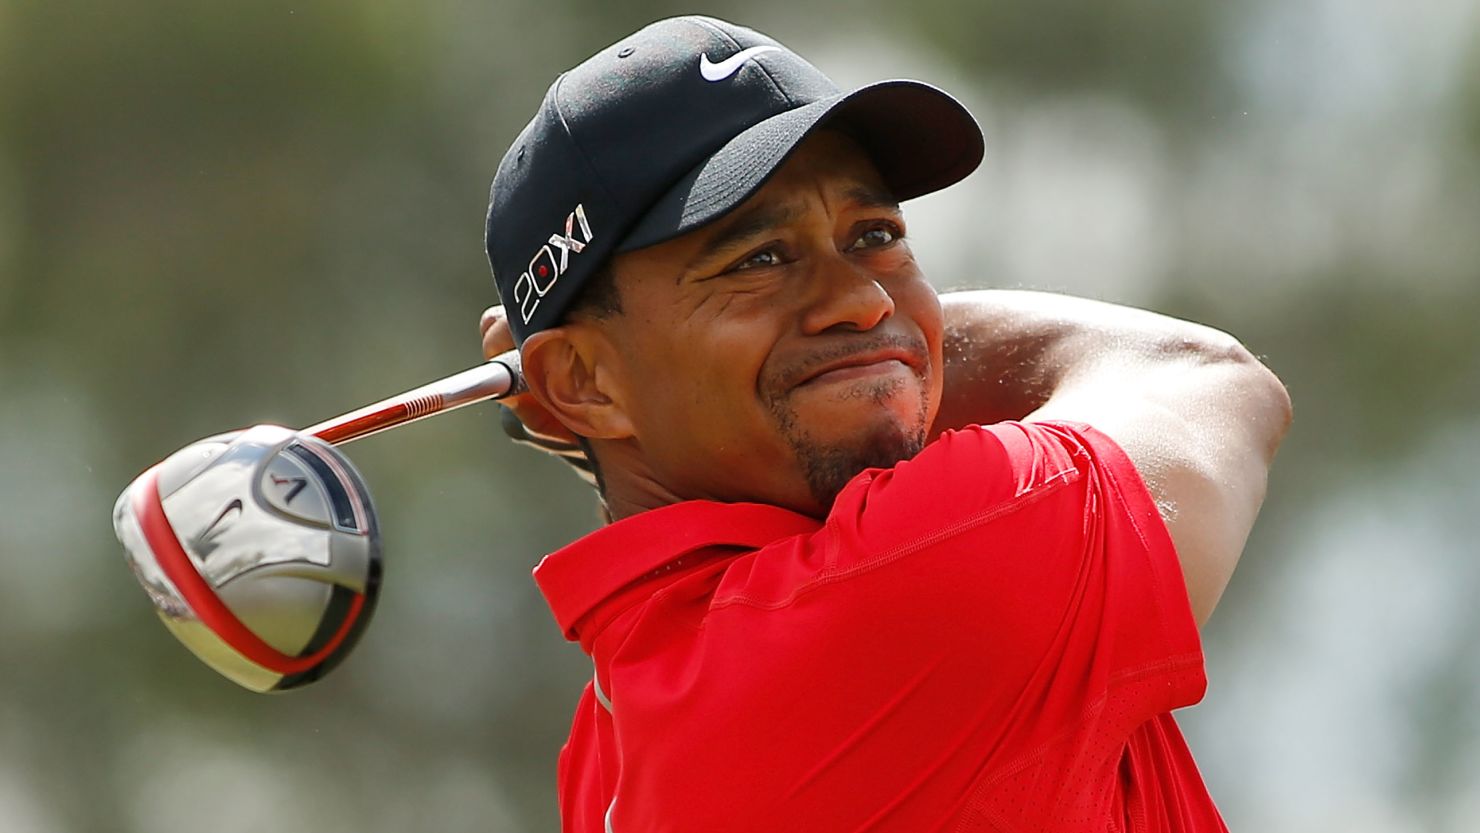 Tiger Woods took the WGC Championship in Florida to set him up perfectly for the Masters in April